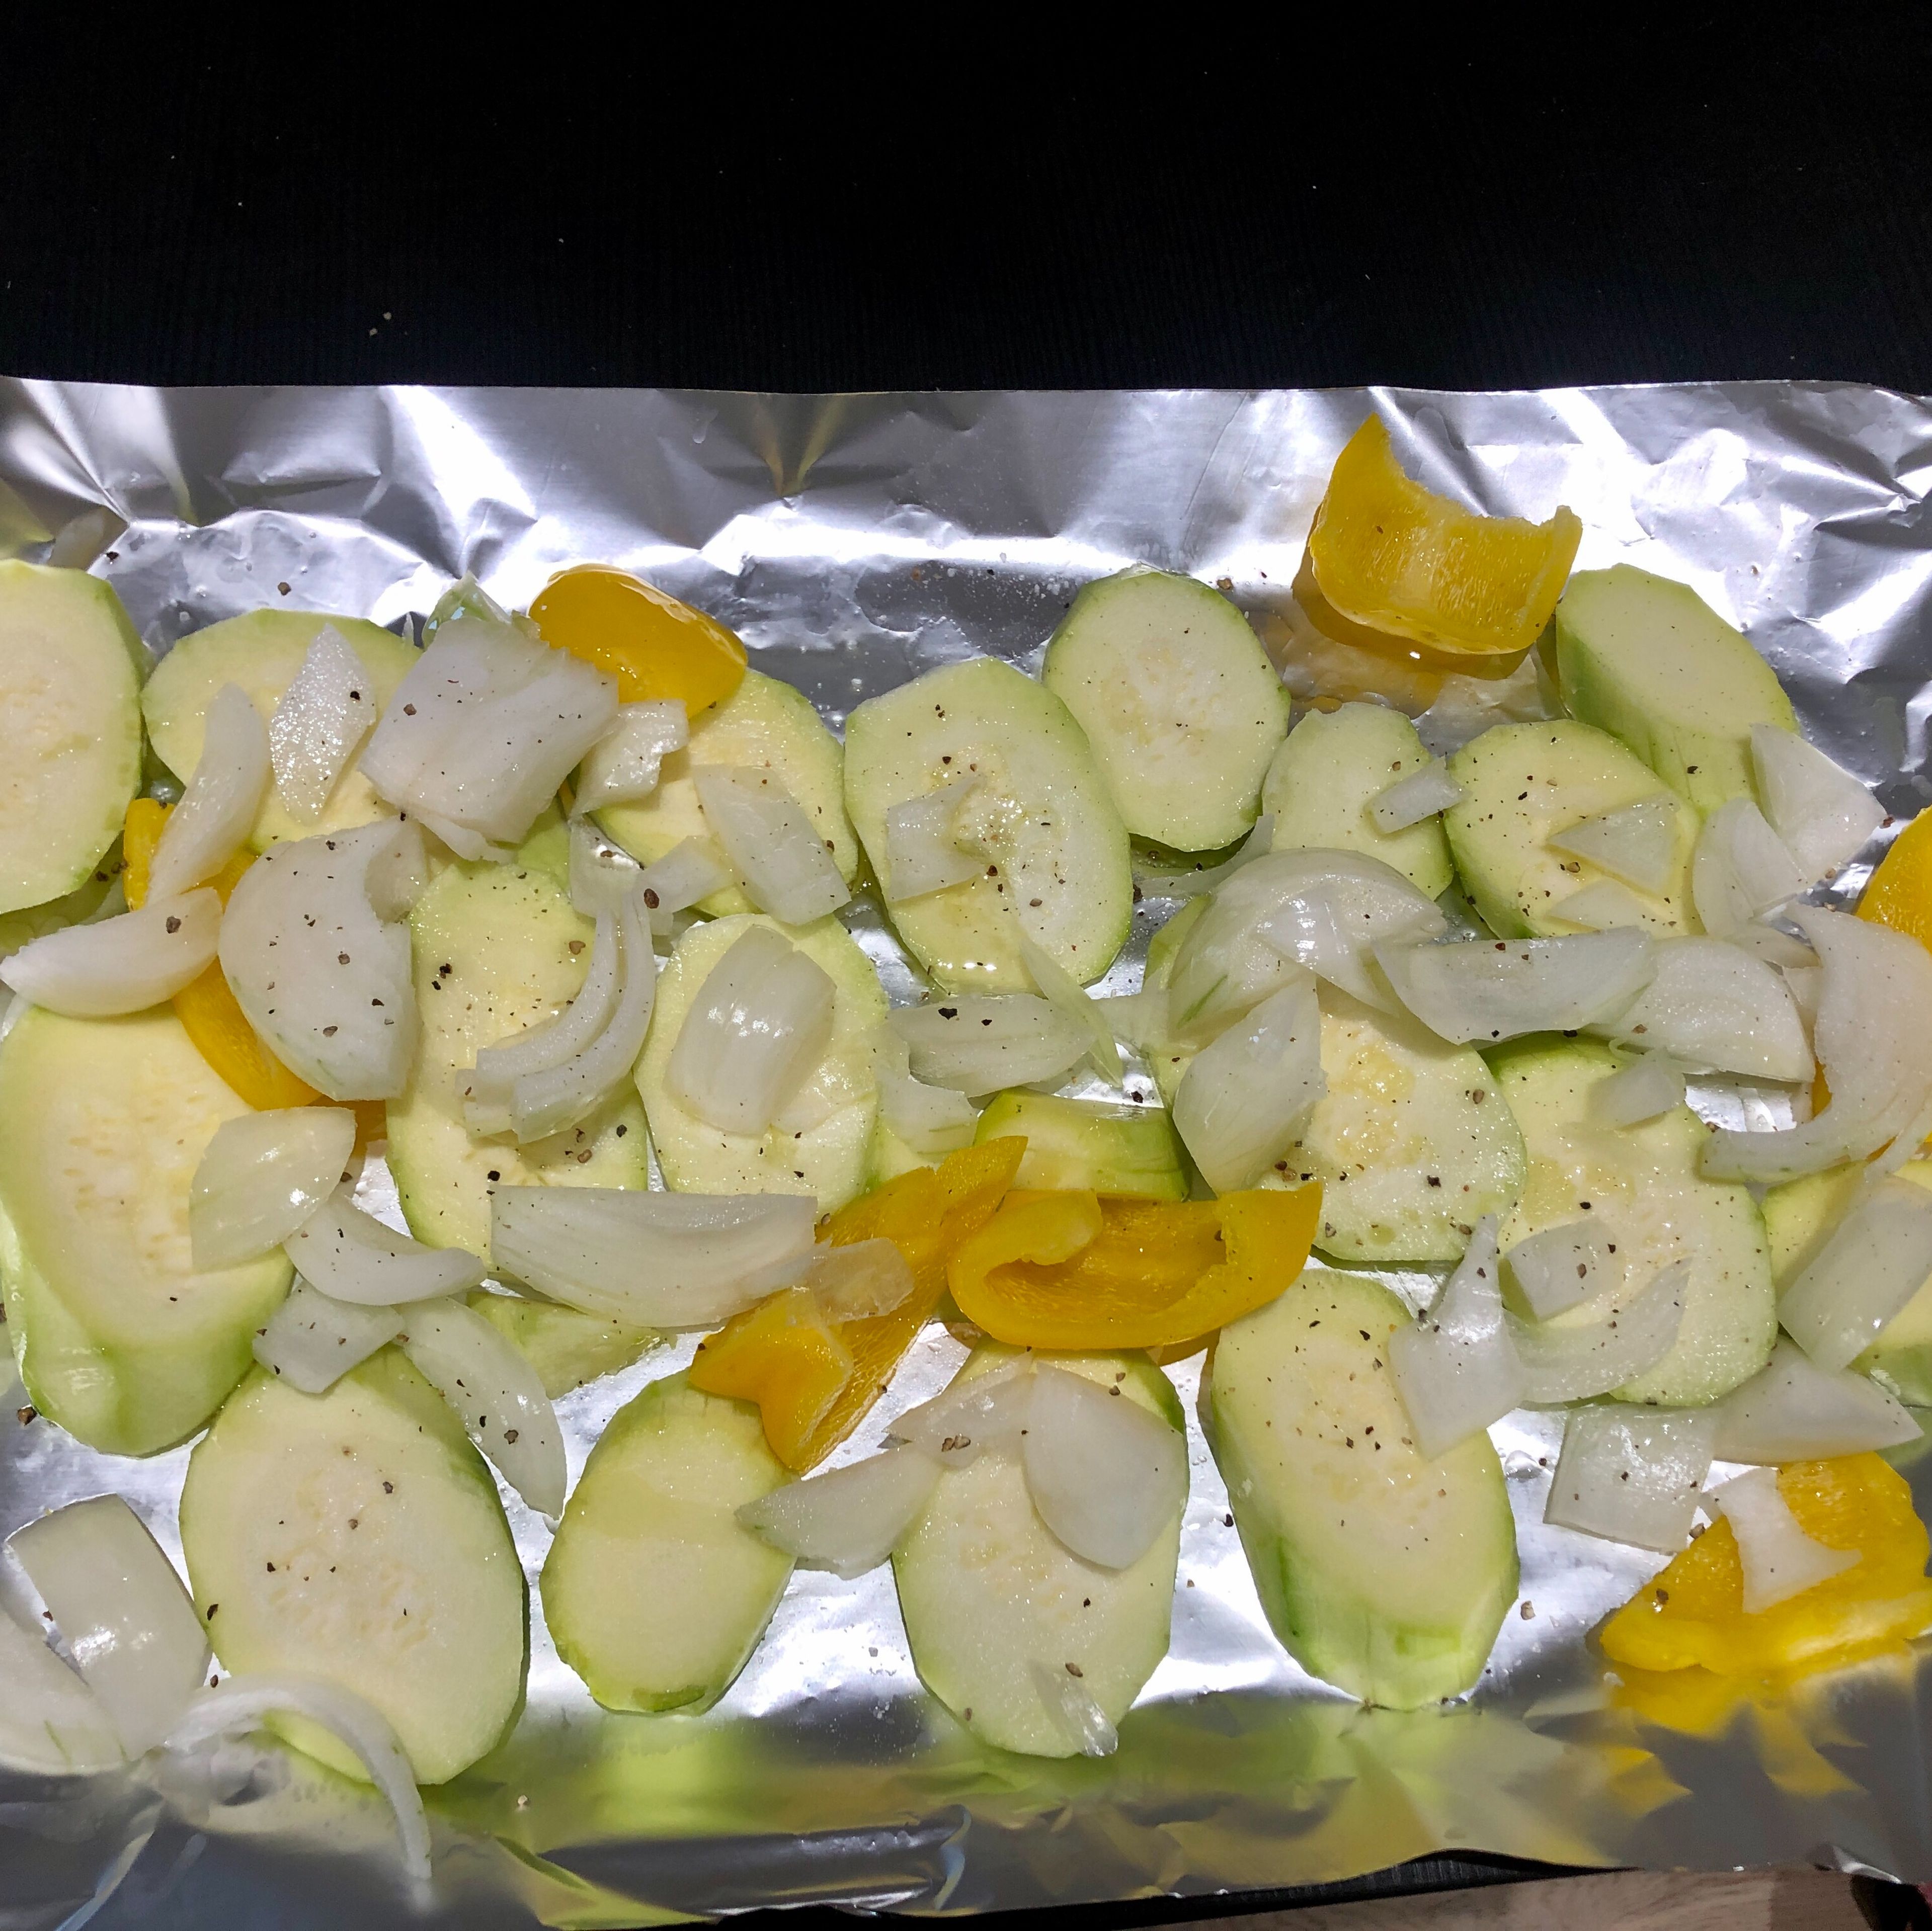 Dice courgette, pepper and onion into slices. Drizzle with olive oil and sea salt